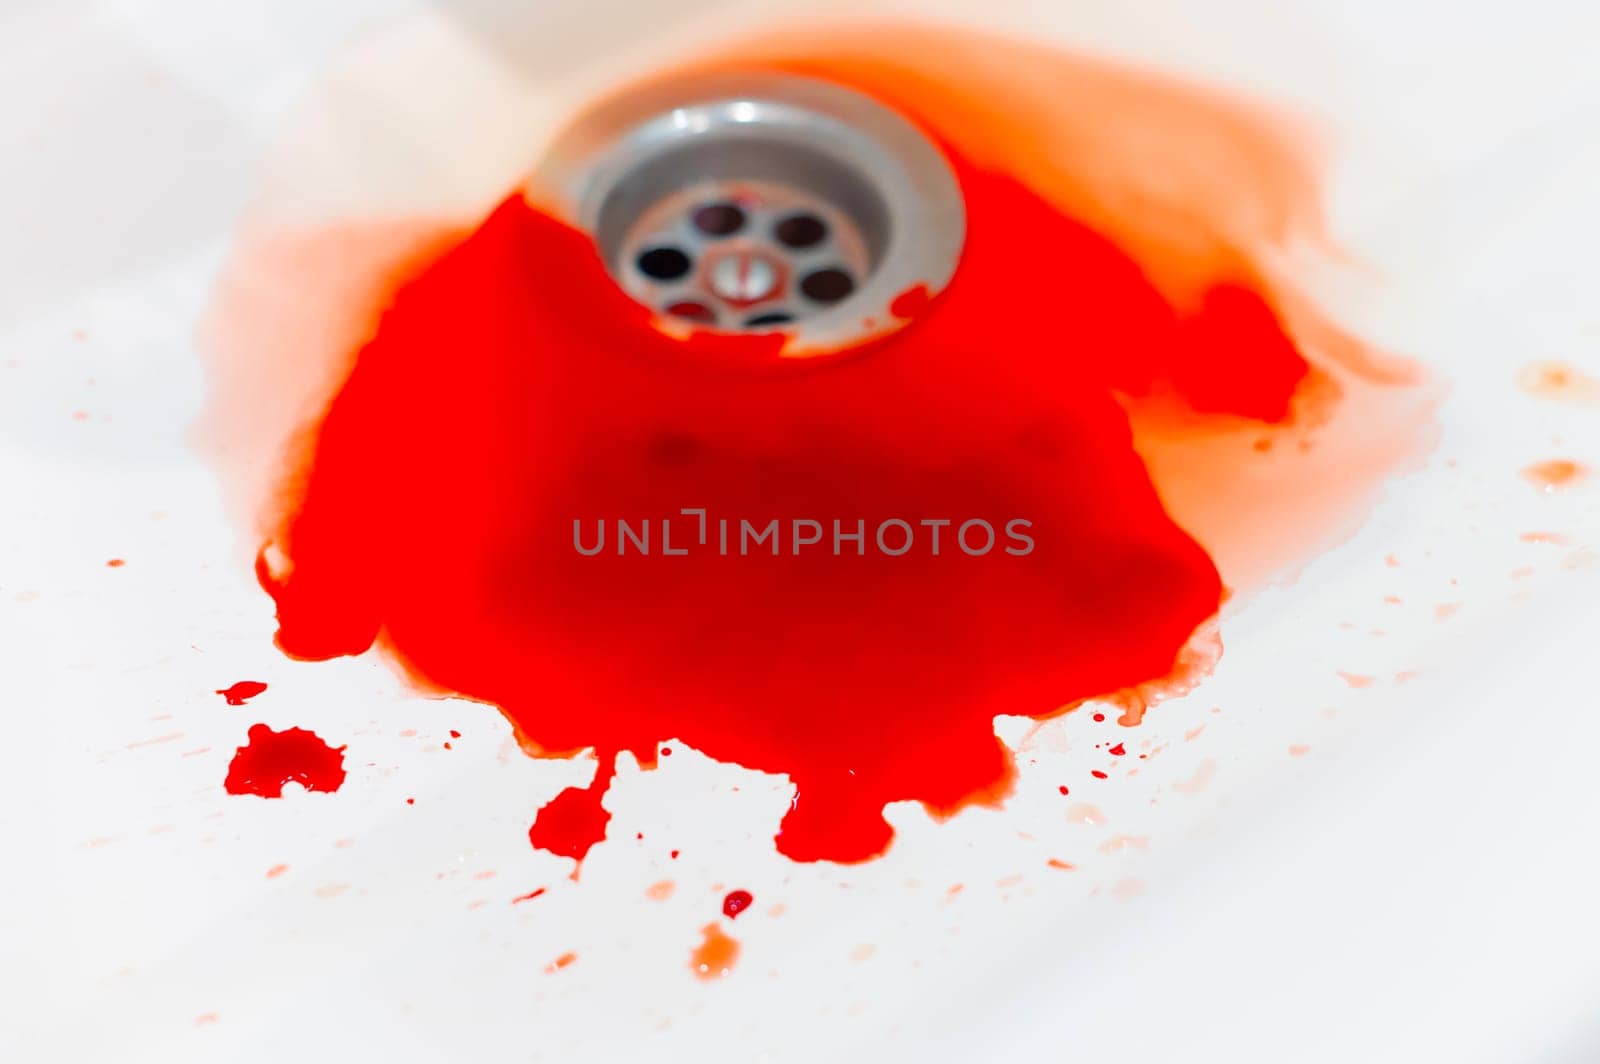 Blood flows over a white bathroom sink. Blood stains in the drain hole. Sink with streams of blood. Red paint drips down the sink drain. Accident with human injuries. Bleeding in the bathroom.